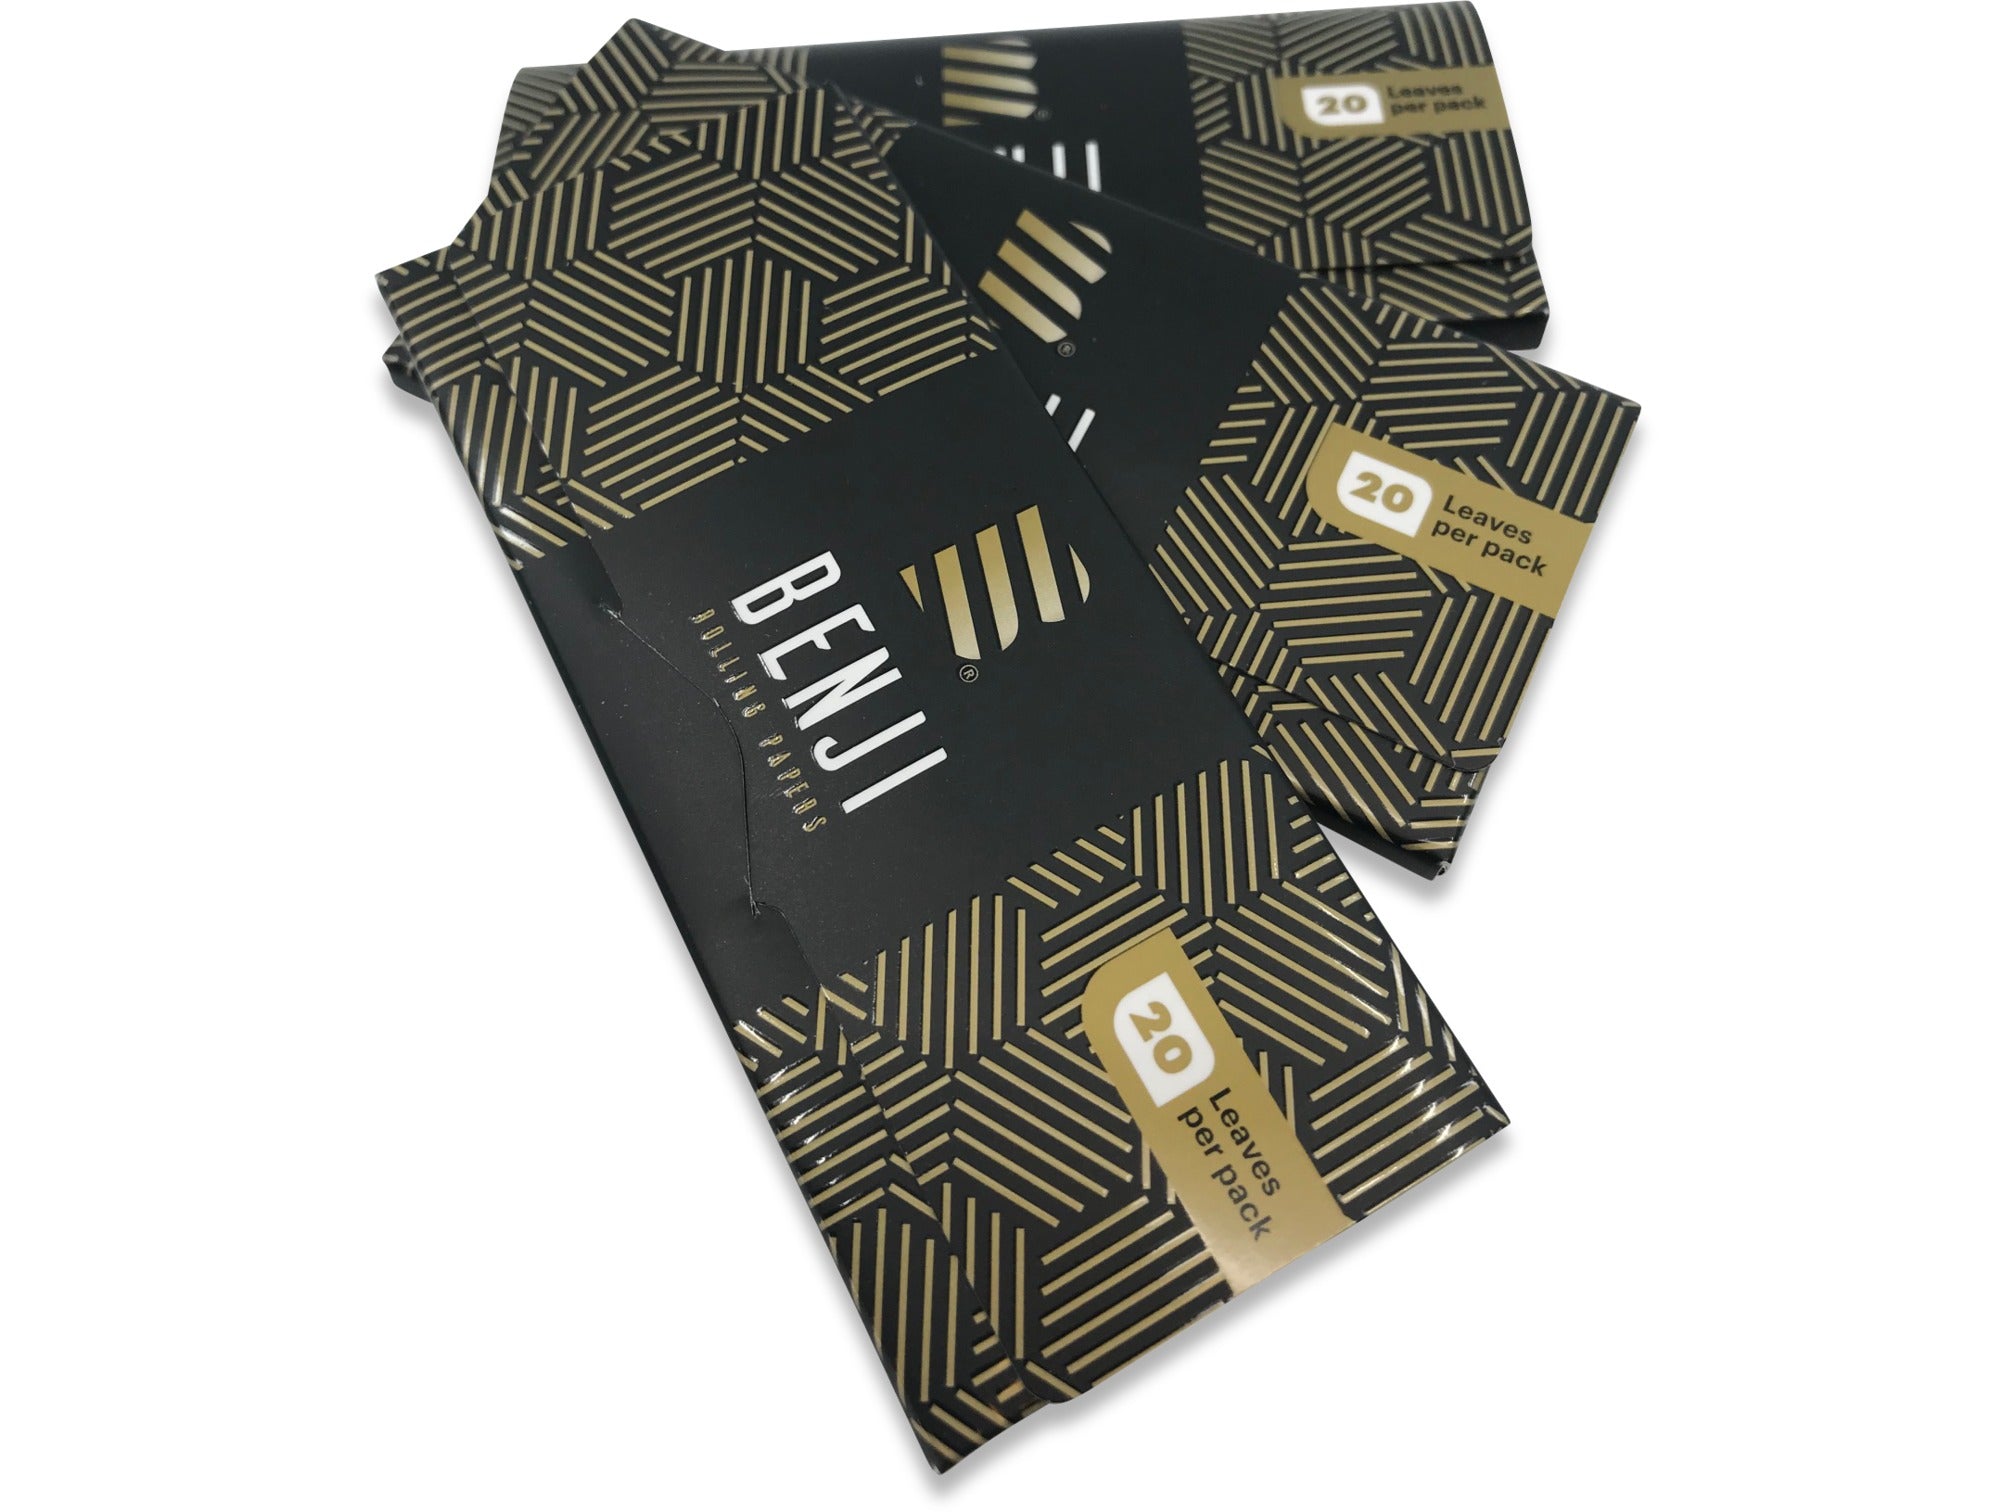 Benji $100 Print Rolling Paper Booklets (3 pack) Rolling Paper Benji Papers 